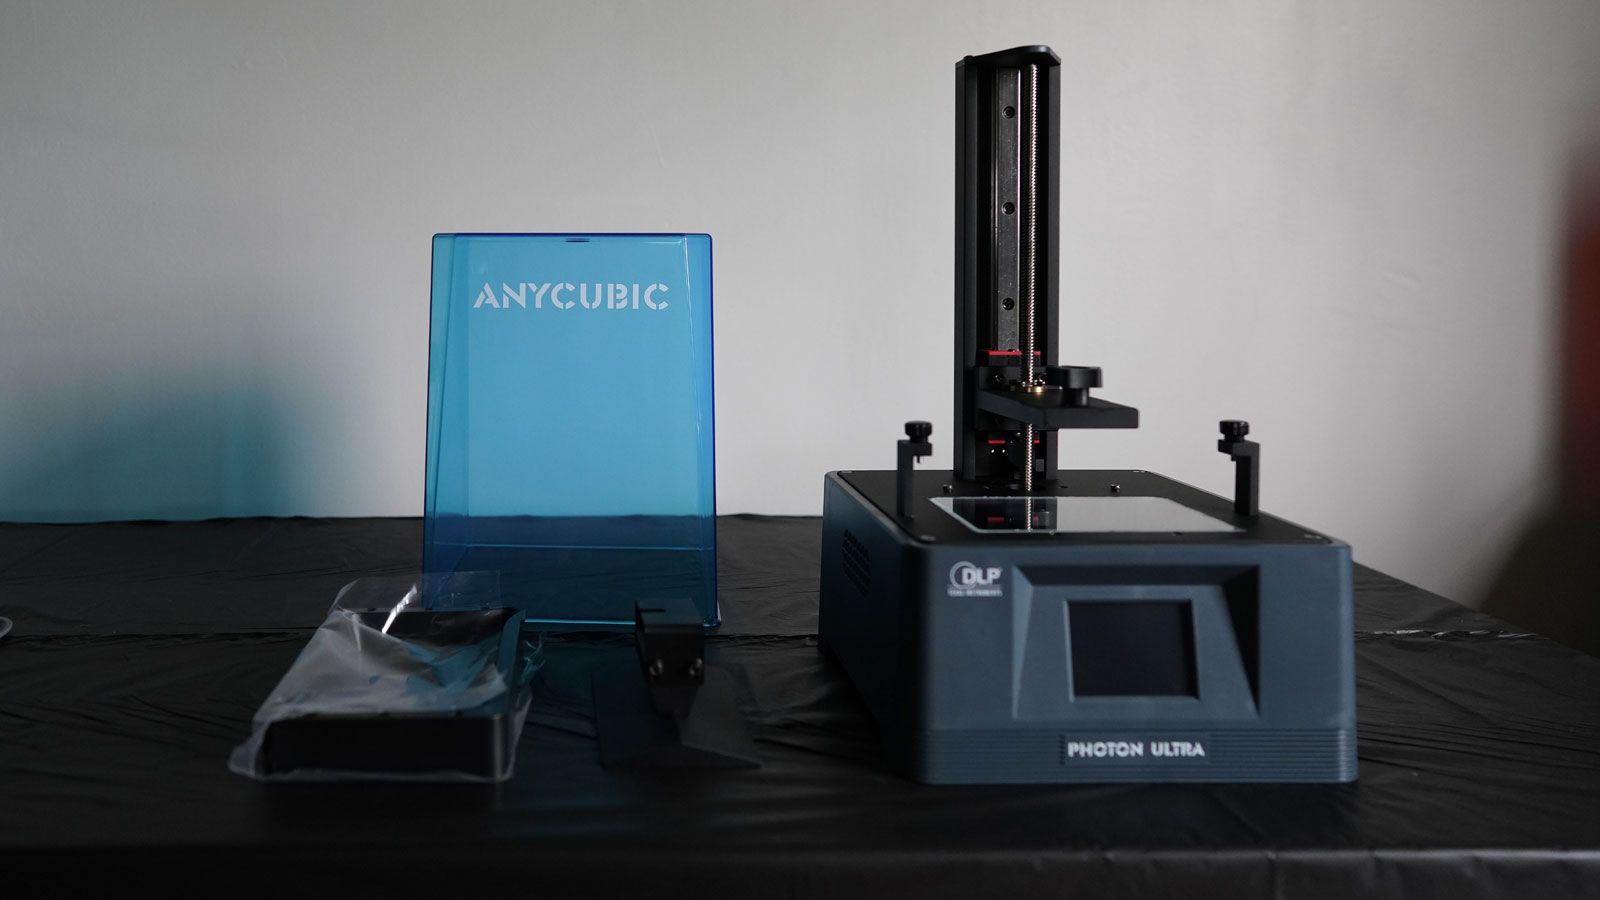 Anycubic photon ultra unboxed components